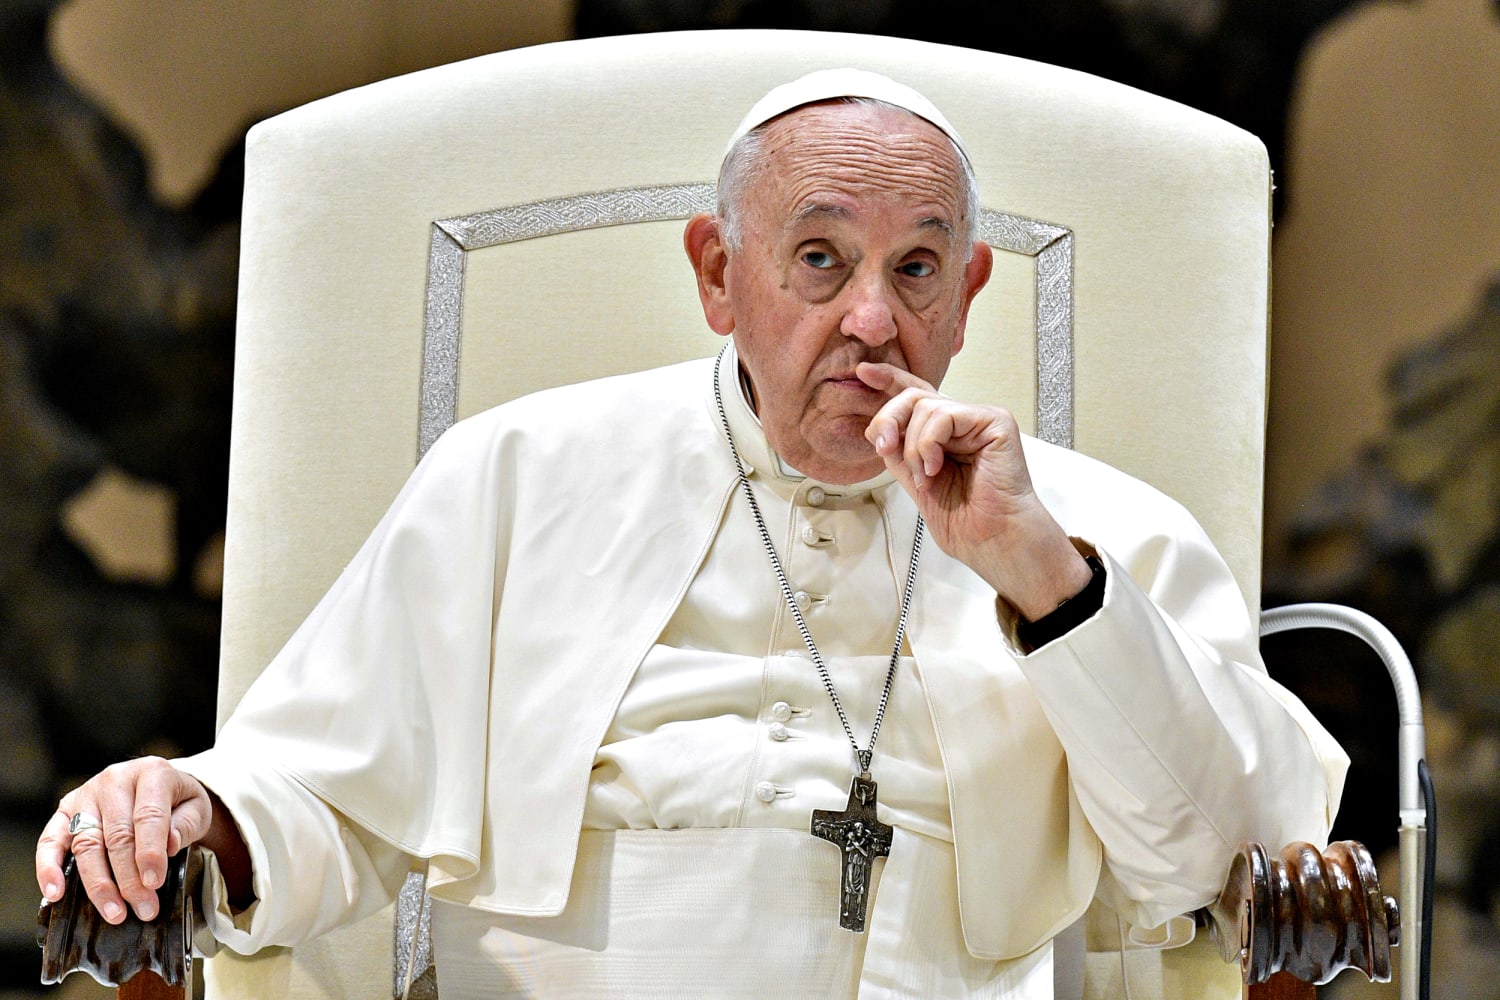 Pope Francis teed off on U.S. conservatives in private remarks